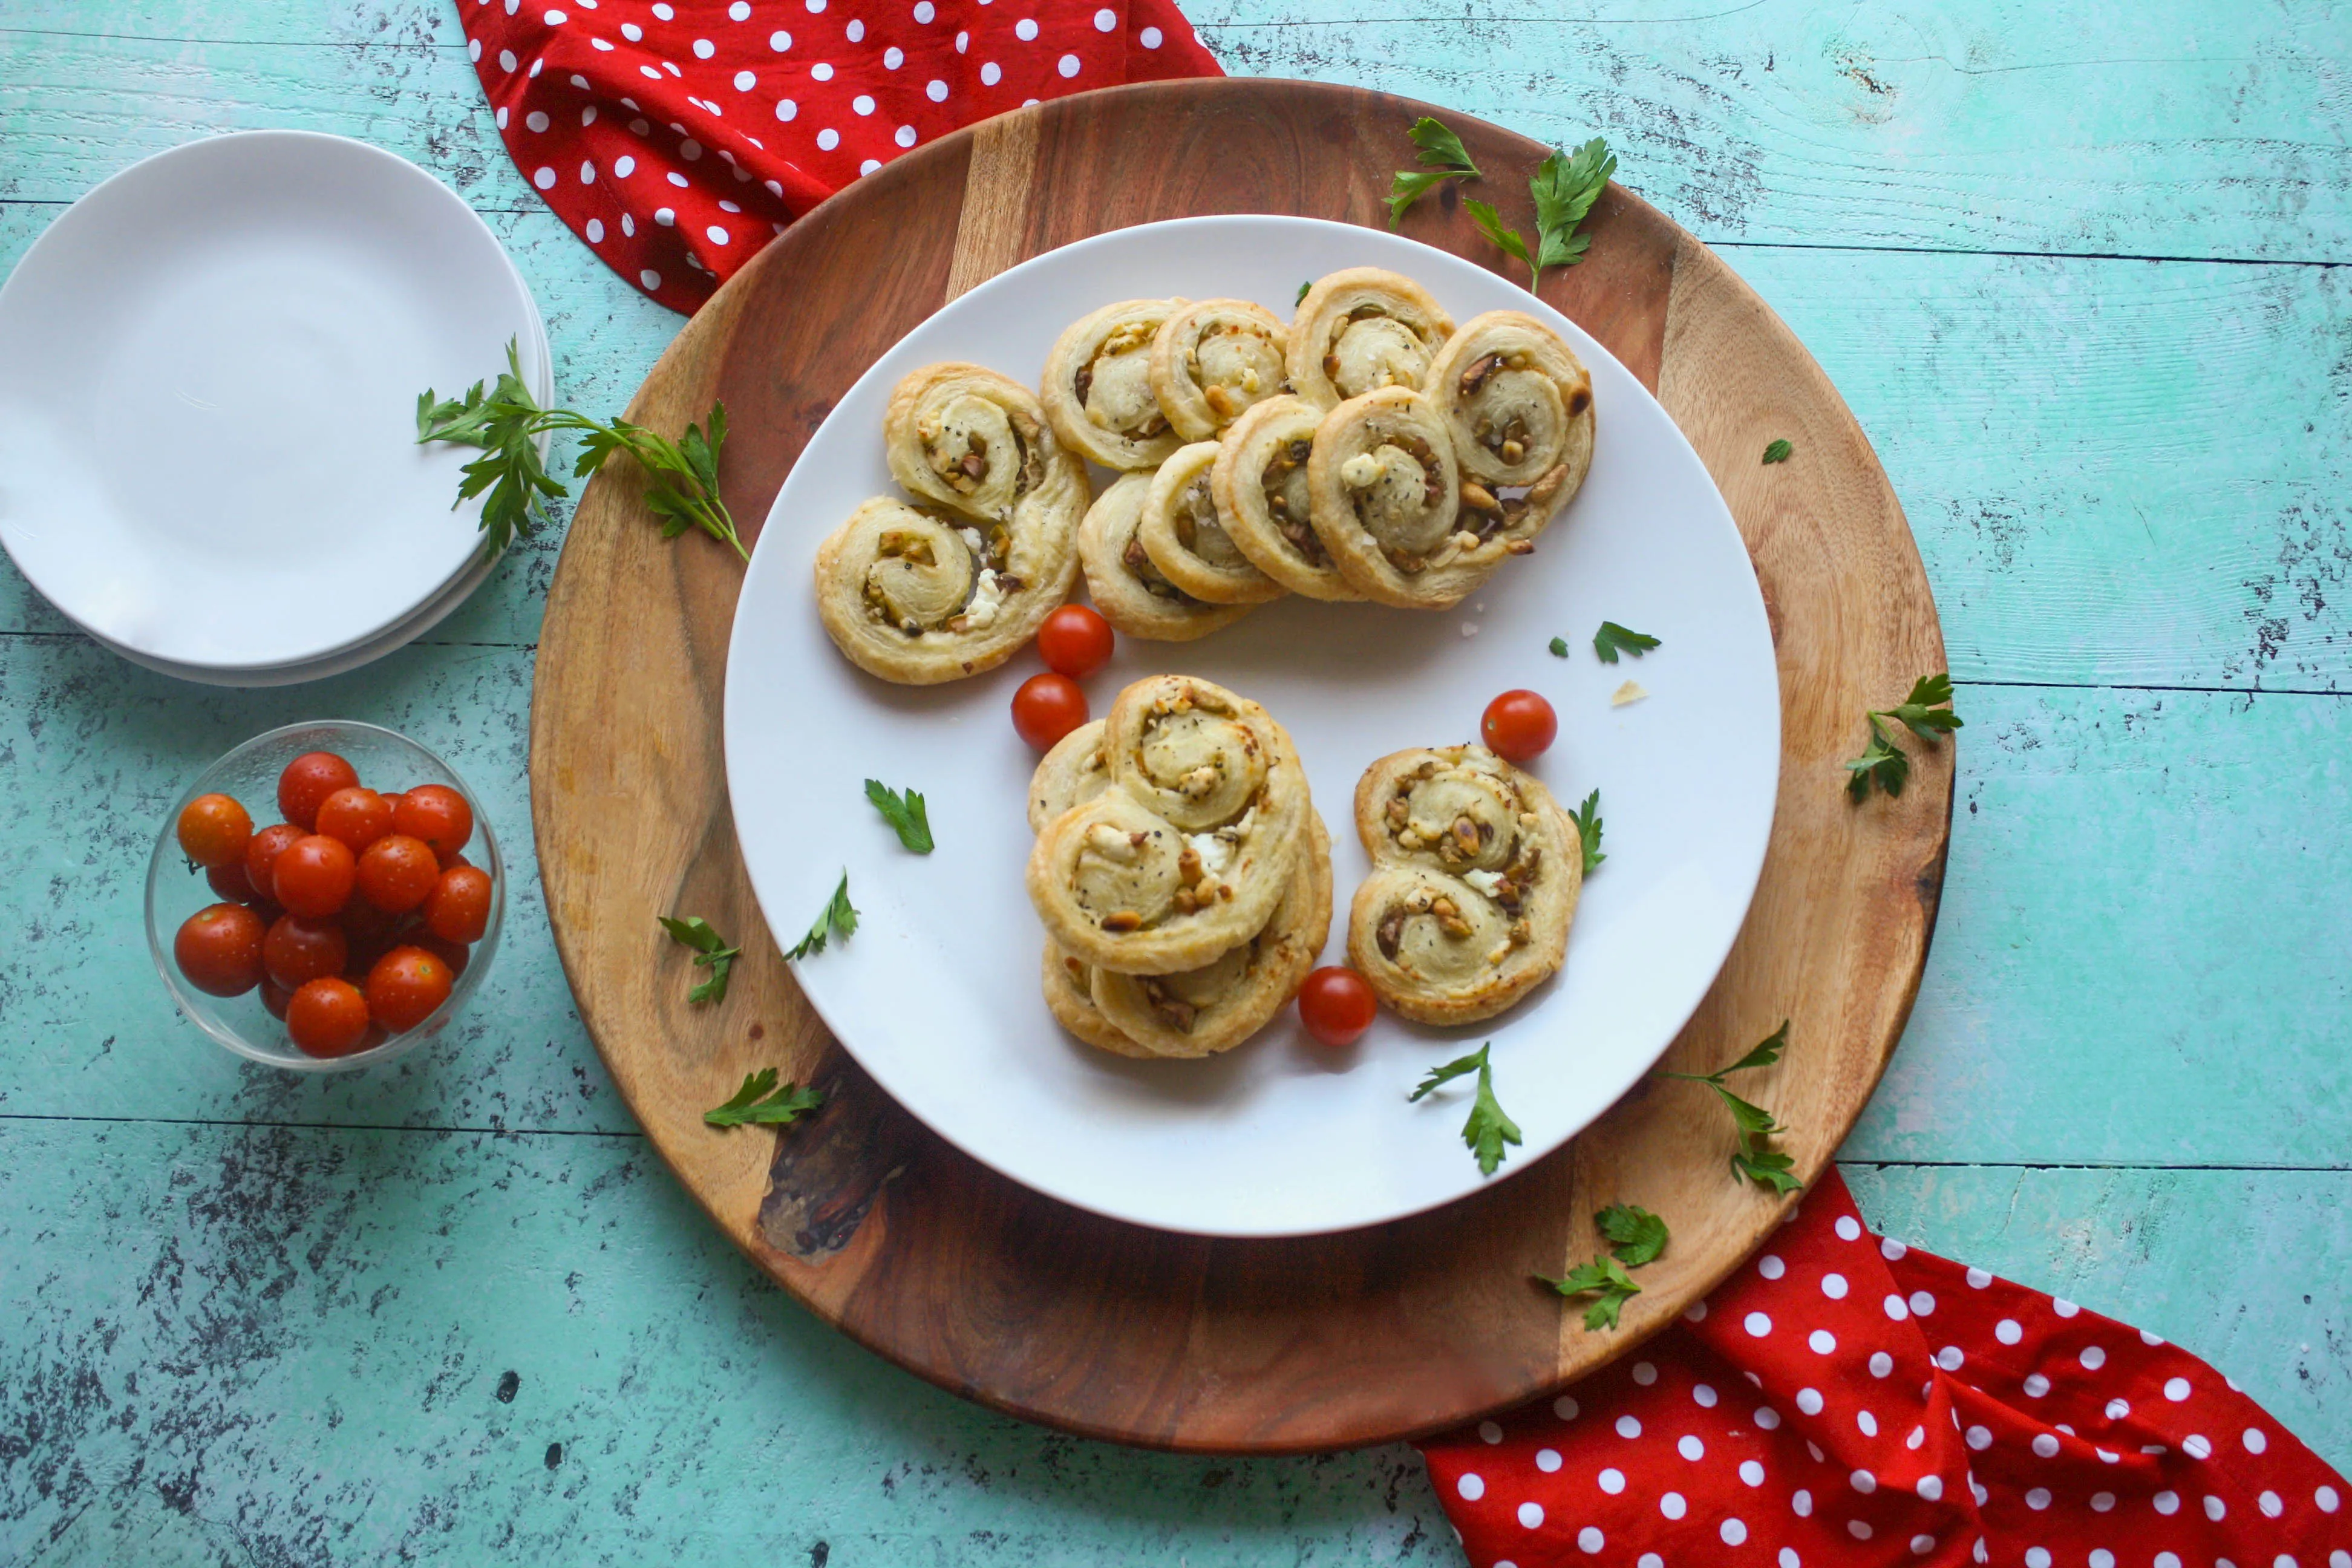 Savory Olive and Goat Cheese Palmiers are a fun snack to share. They're so easy to make, too!